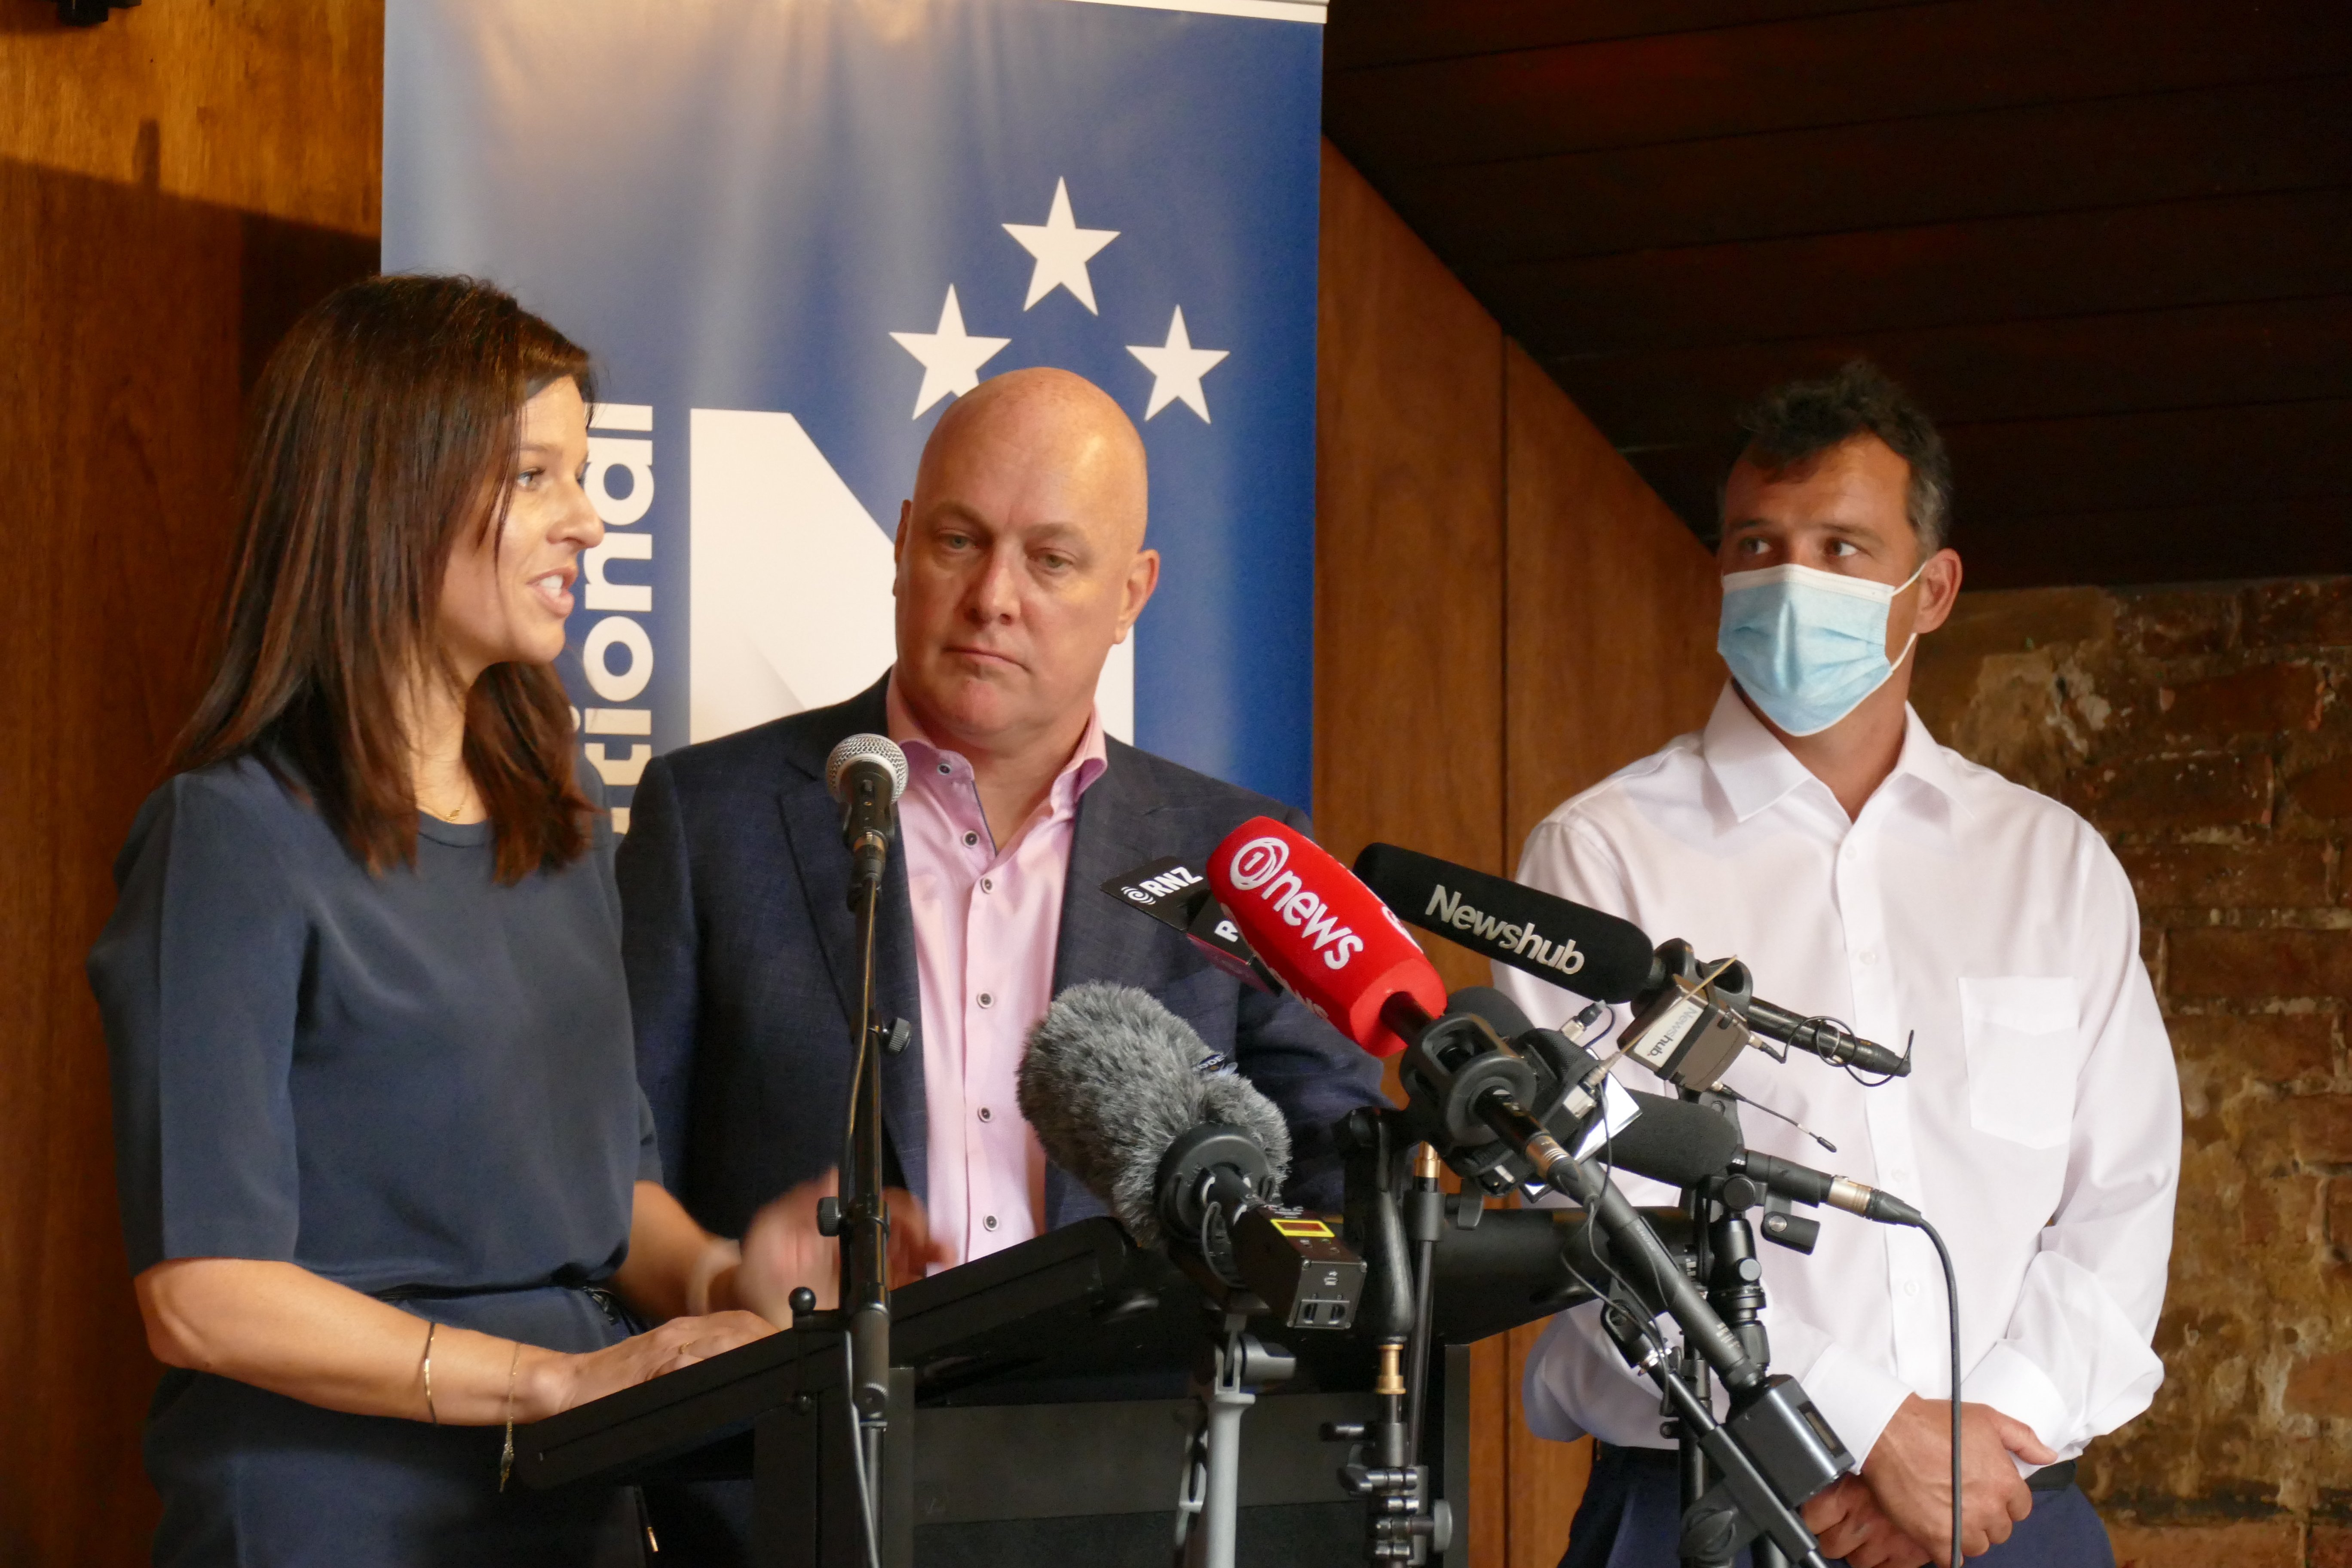 Speaking at a function in Queenstown are (from left) National Party immigration spokeswoman Erica...